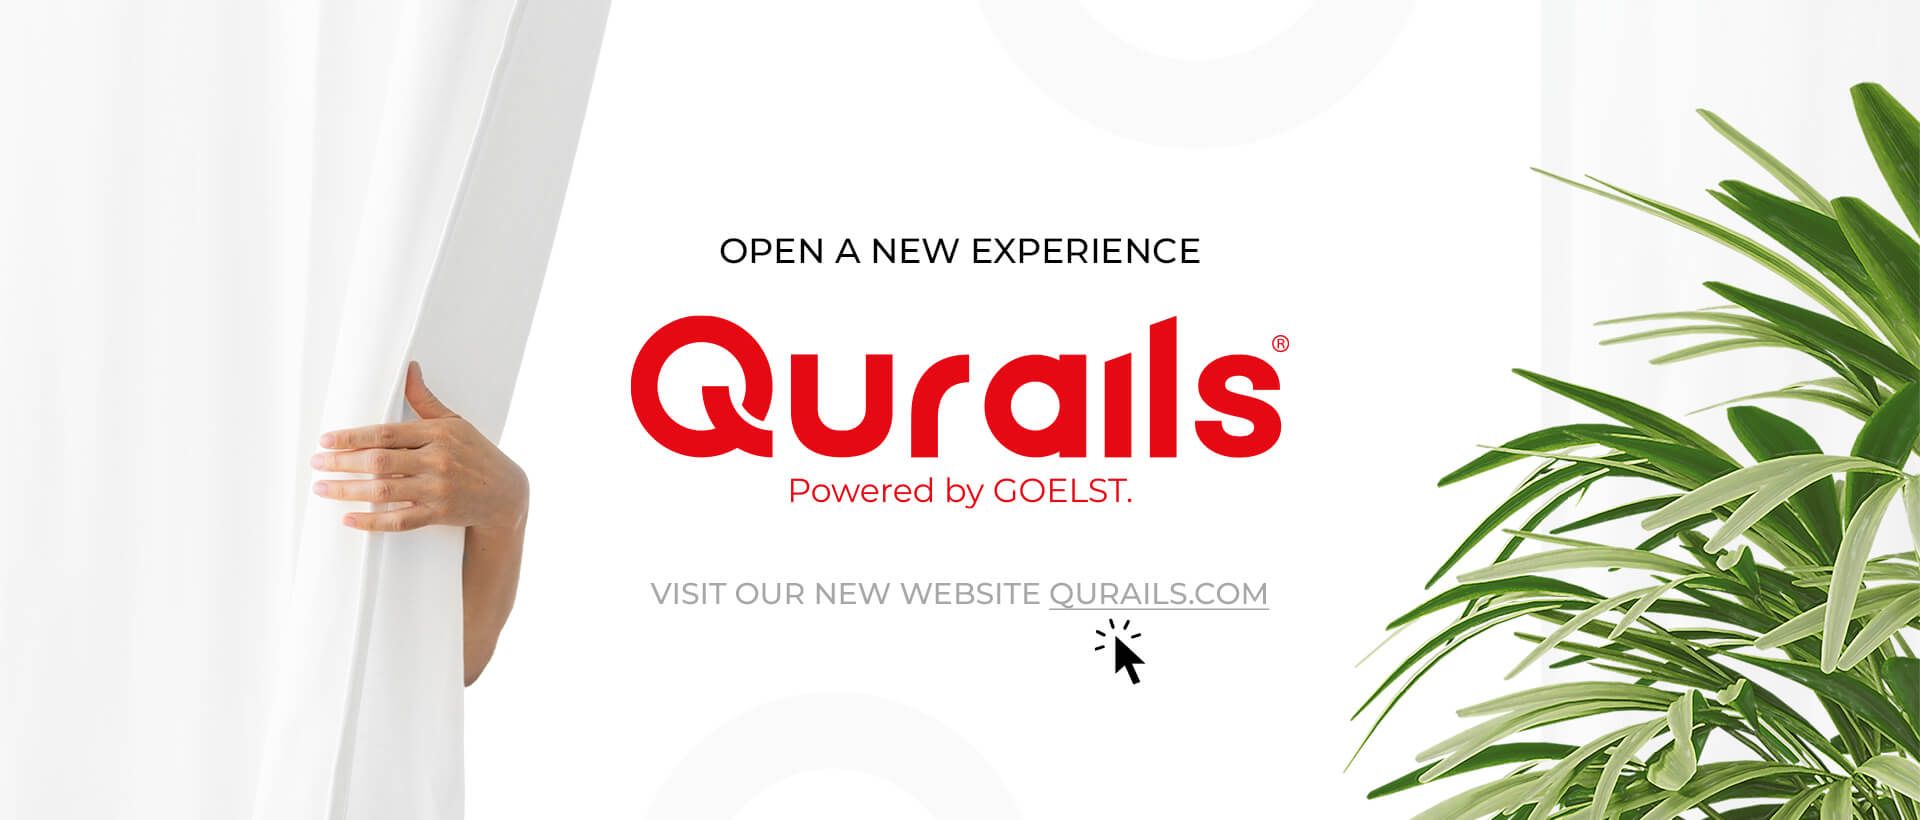 Qurails (powered by Goelst)